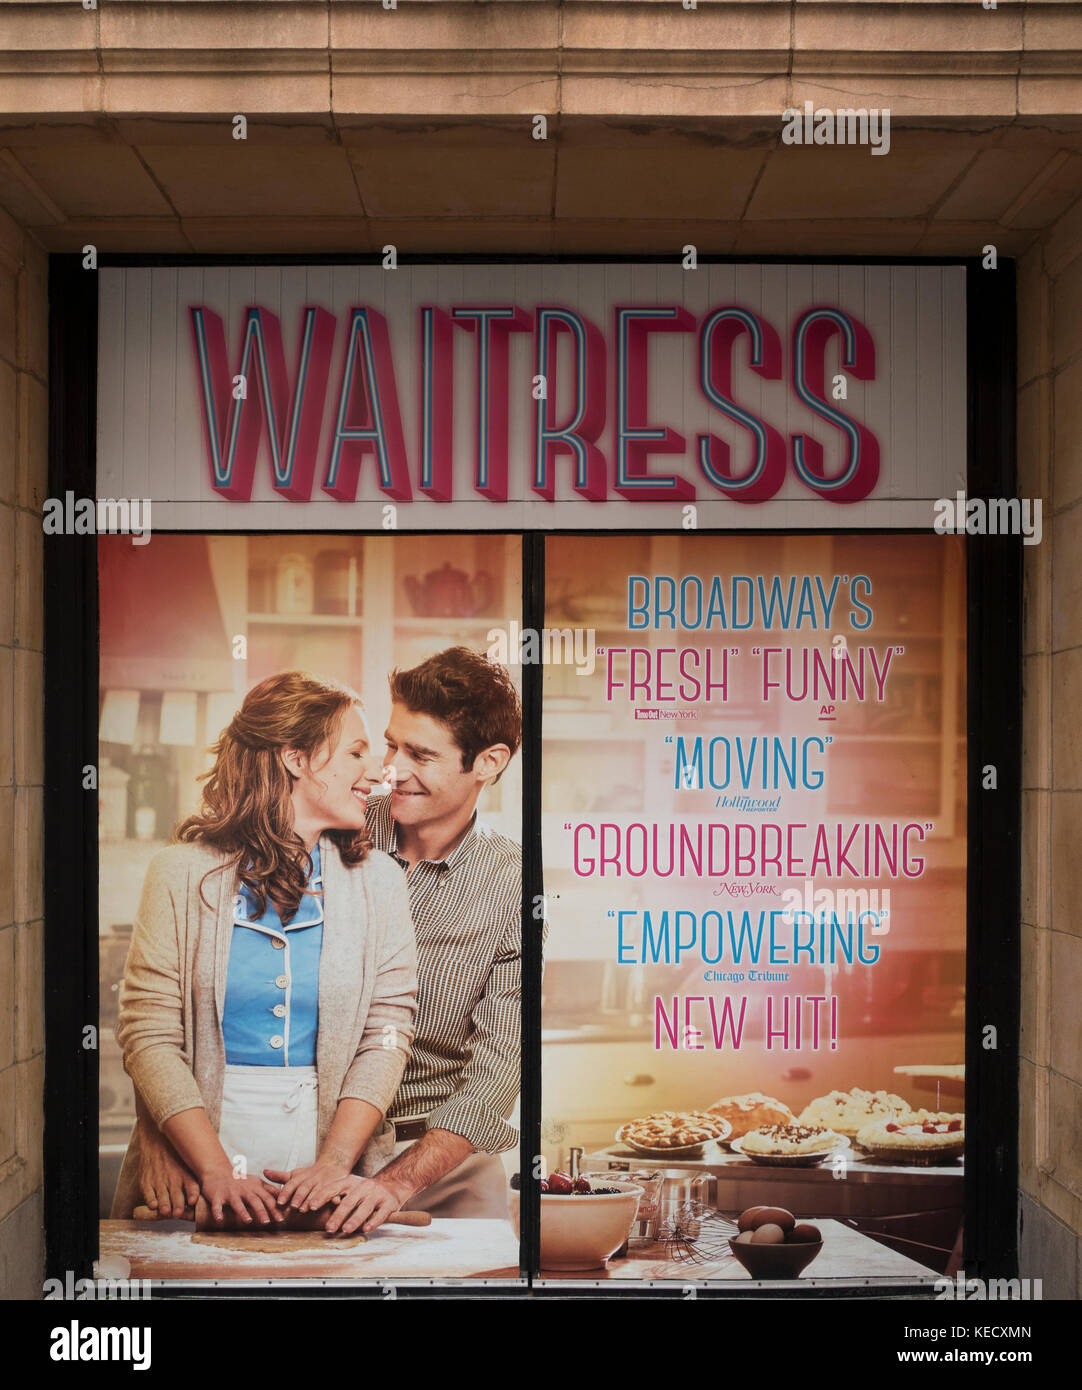 Waitress Broadway theater marquee NYC Stock Photo